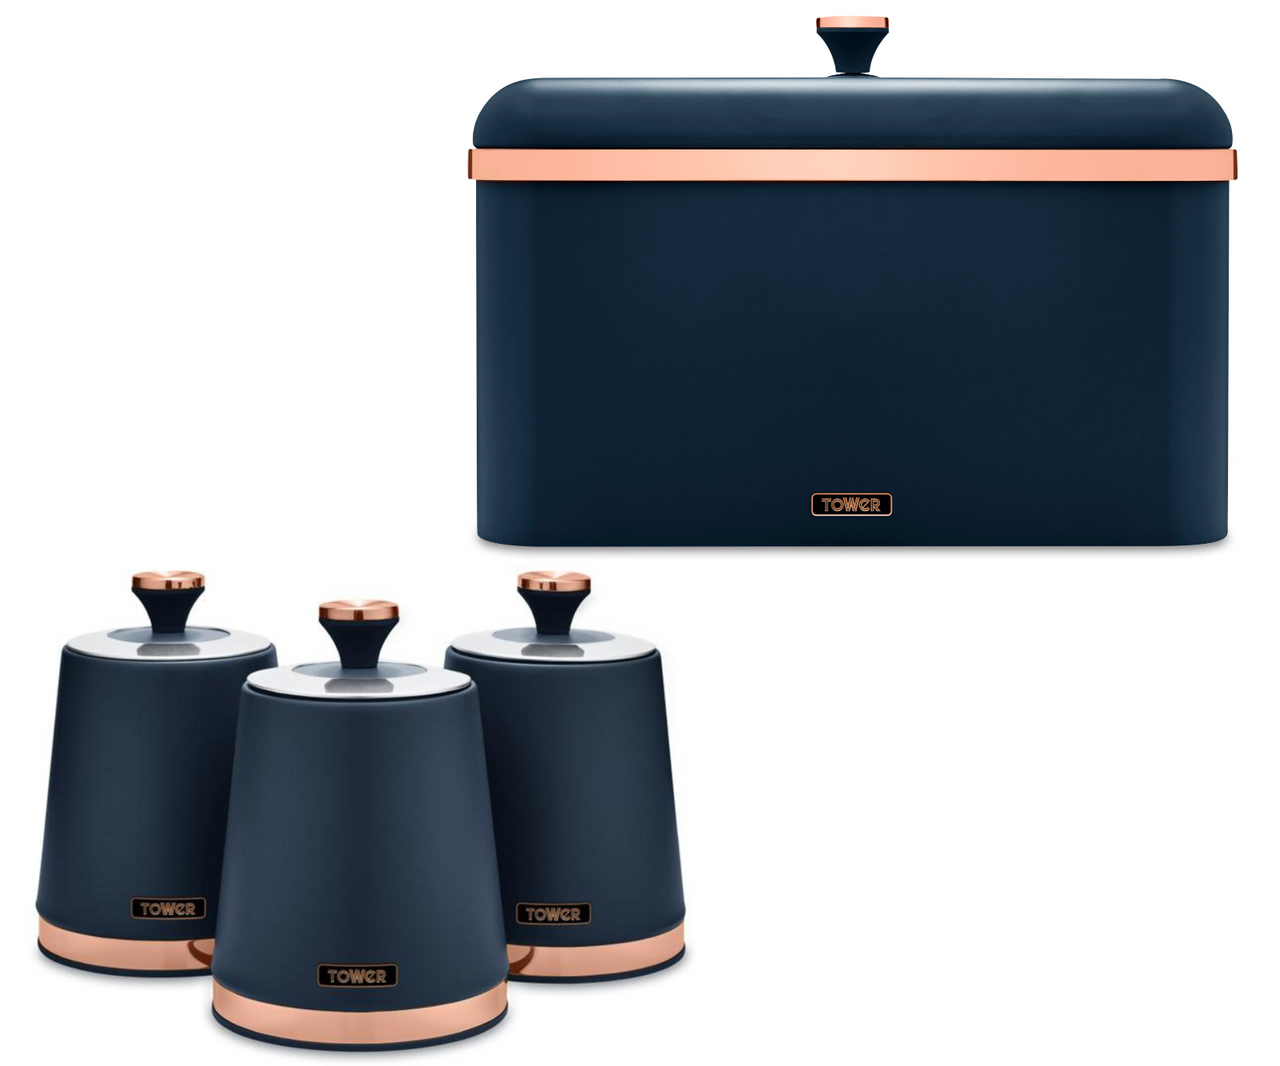 Tower Cavaletto Kitchen Storage Bread Bin Canisters Midnight Blue/Rose Gold